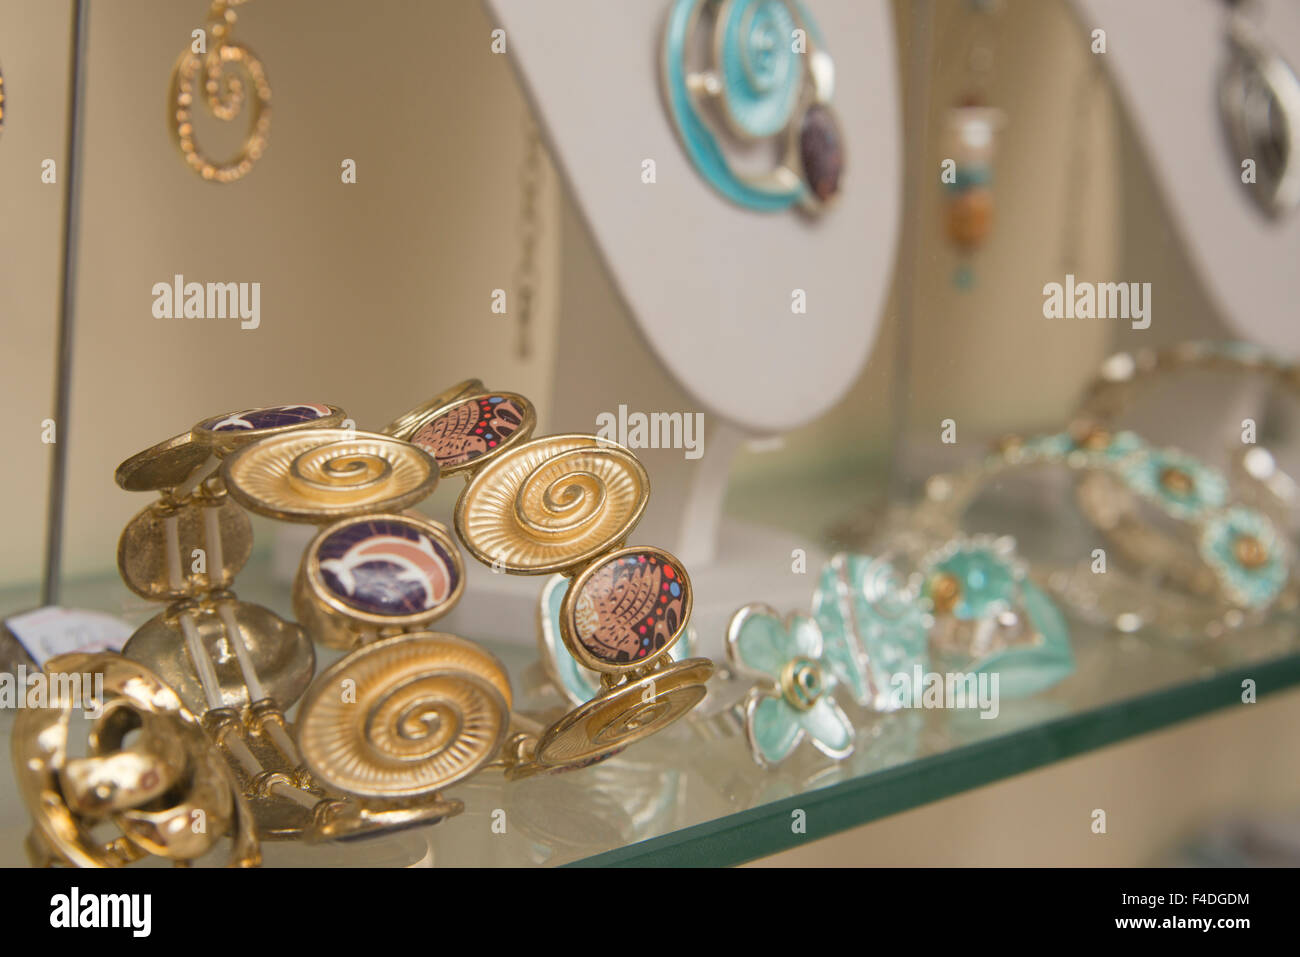 Greece, Cyclades, Mykonos, Hora. Typical gold enamel jewelry in shop window. (Large format sizes available) Stock Photo